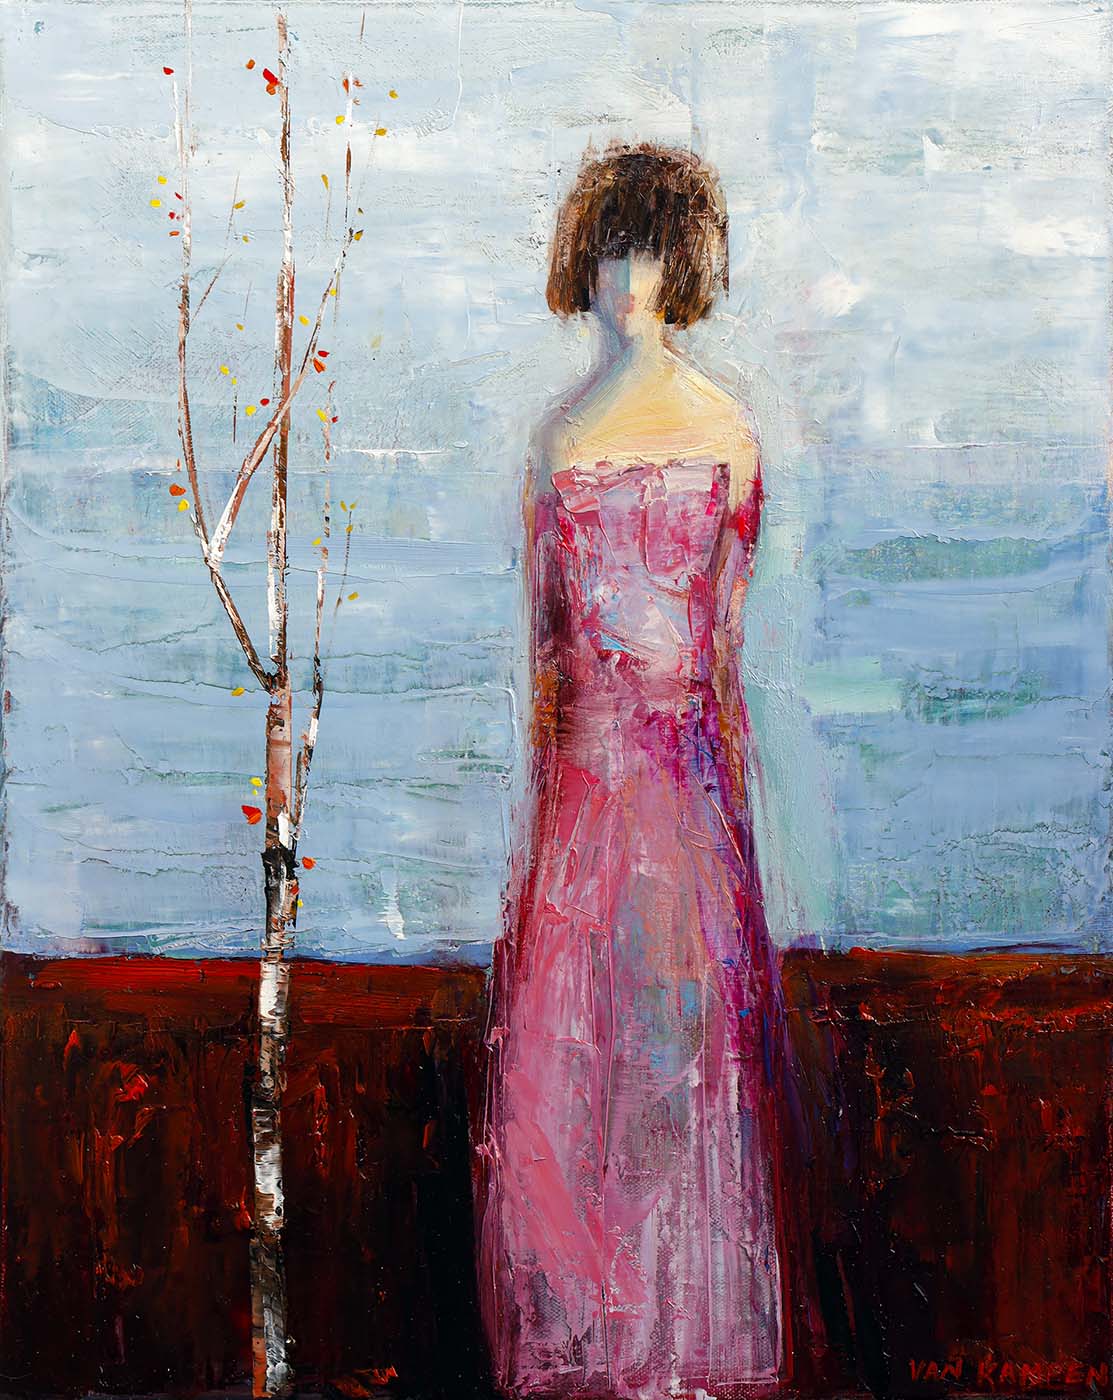 Contemporary art. Title: Precious in Pink, Oil on Canvas, 20 x 16 in by Canadian artist Katherine van Kampen.